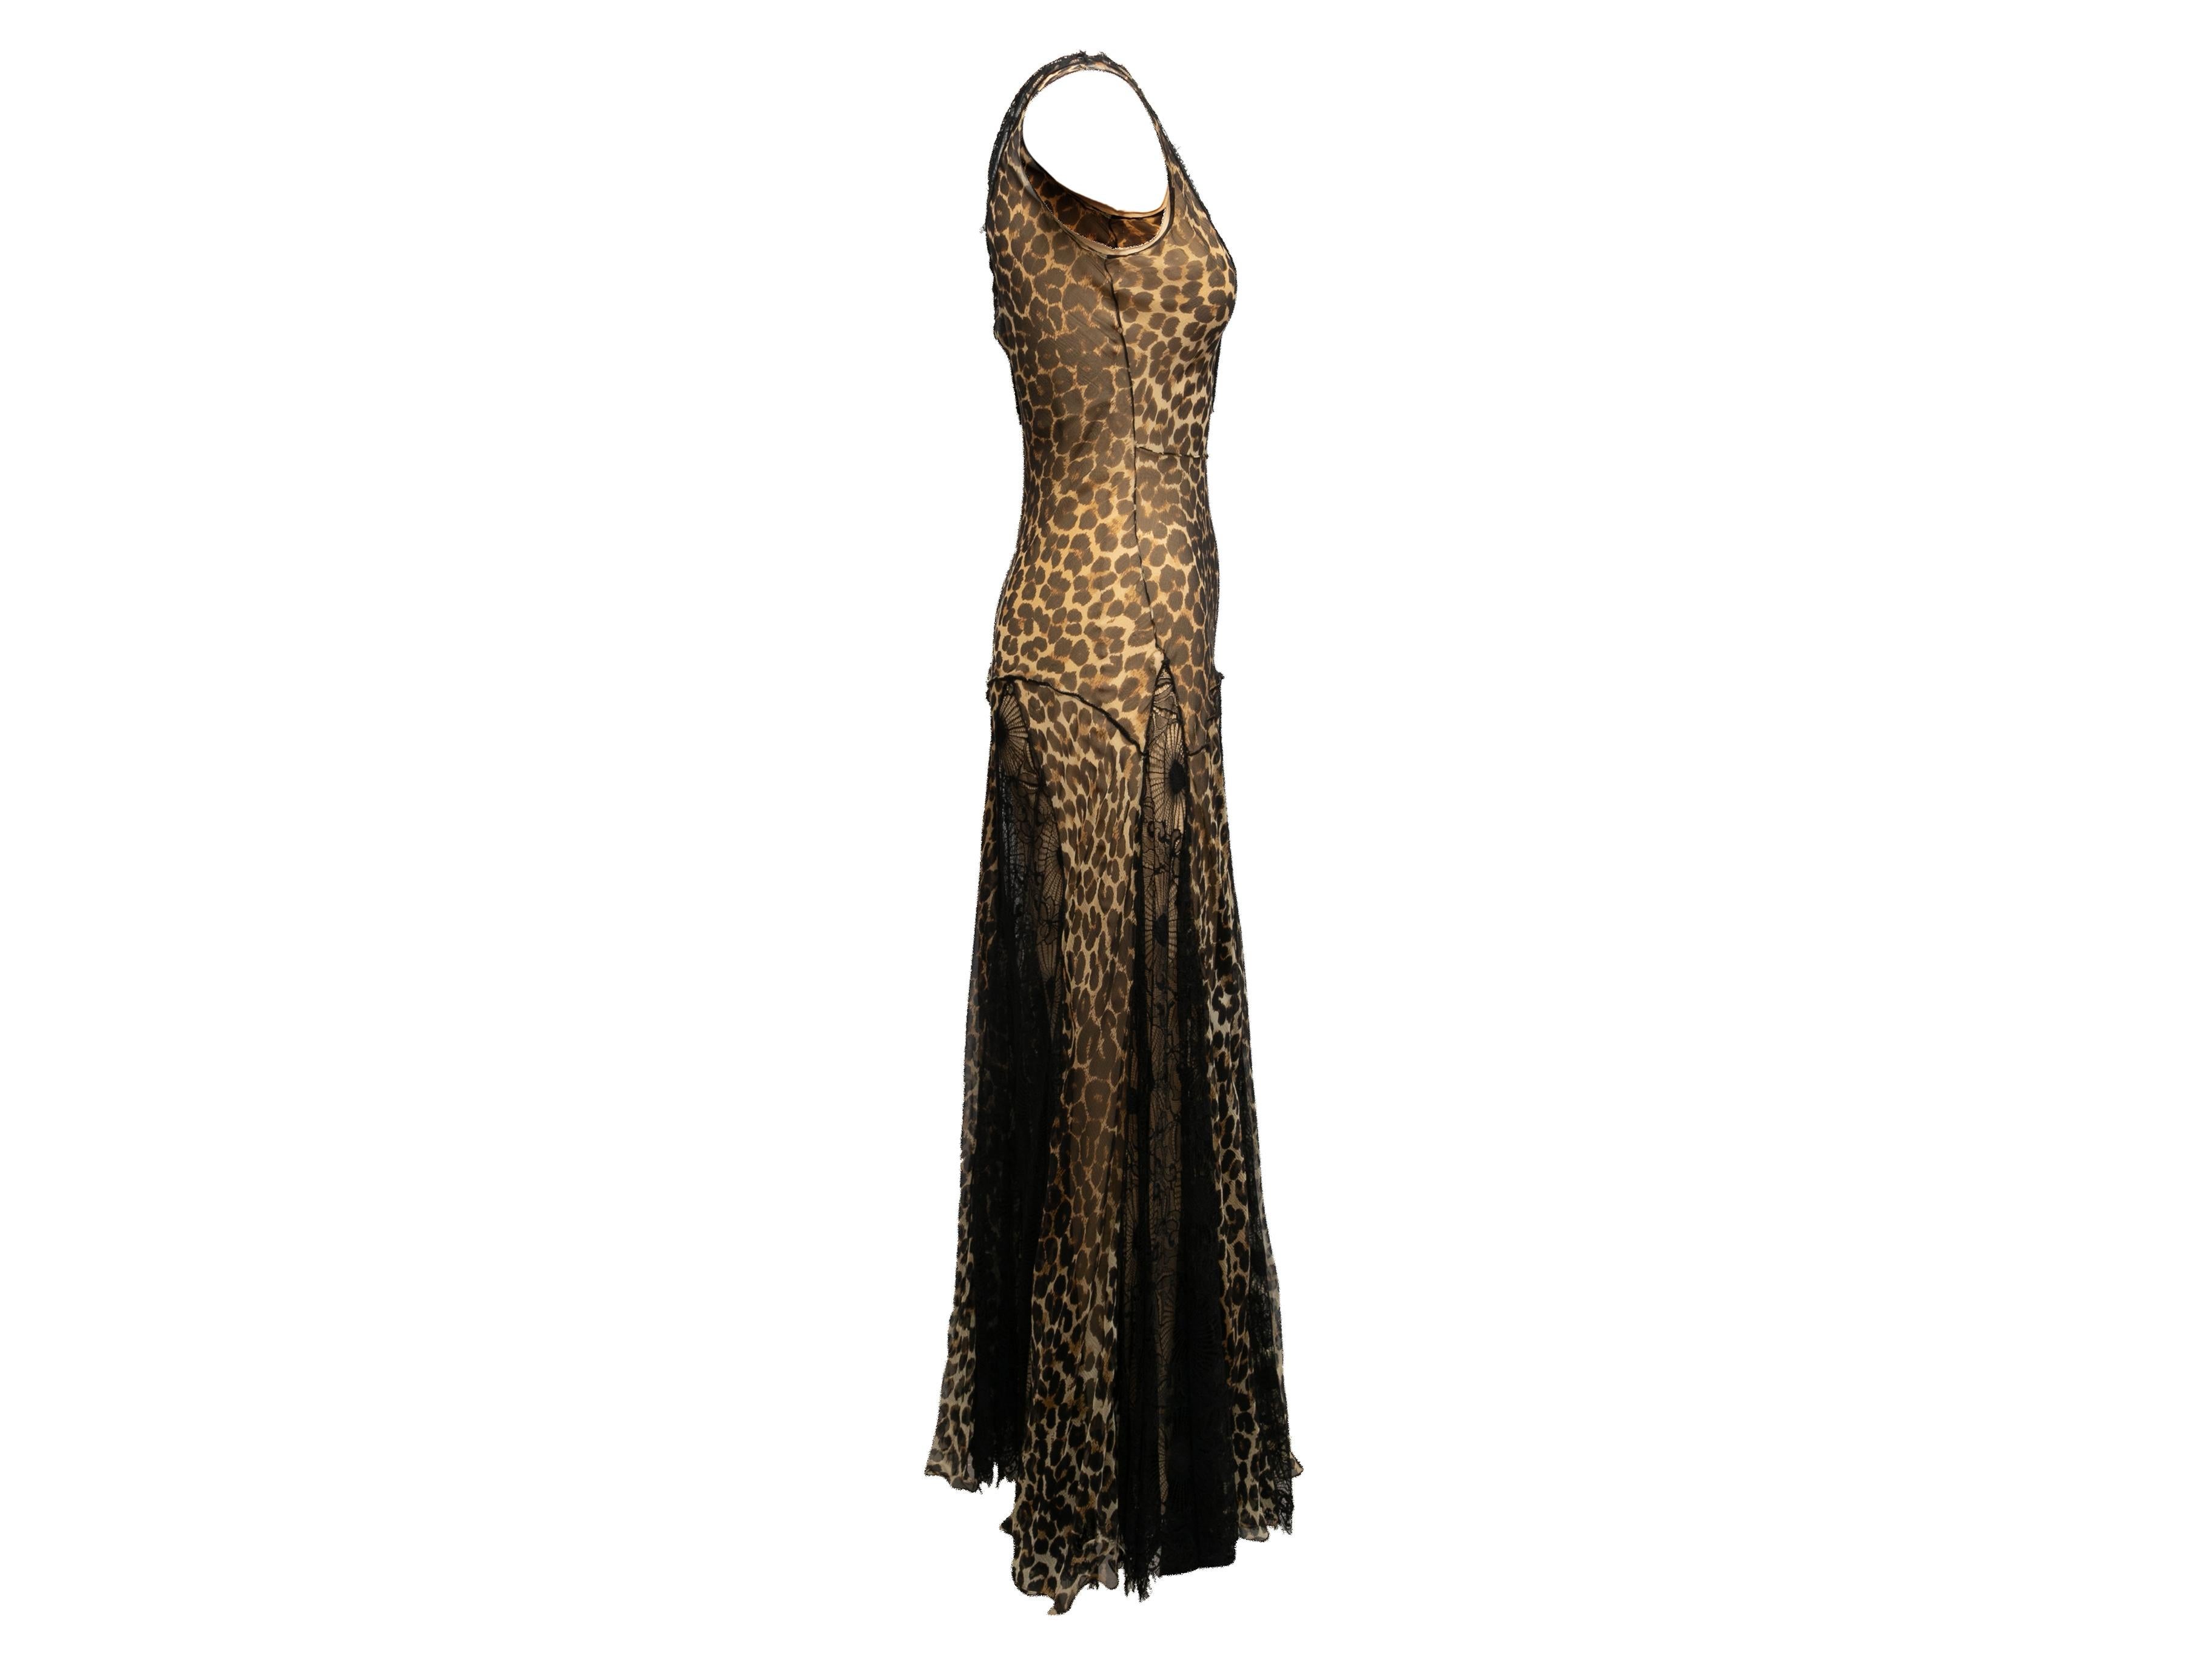 Vintage beige and black leopard print silk and lace sleeveless gown by John Galliano. From the Fall/Winter 2002 Collection. V-neck. Side closures. 28